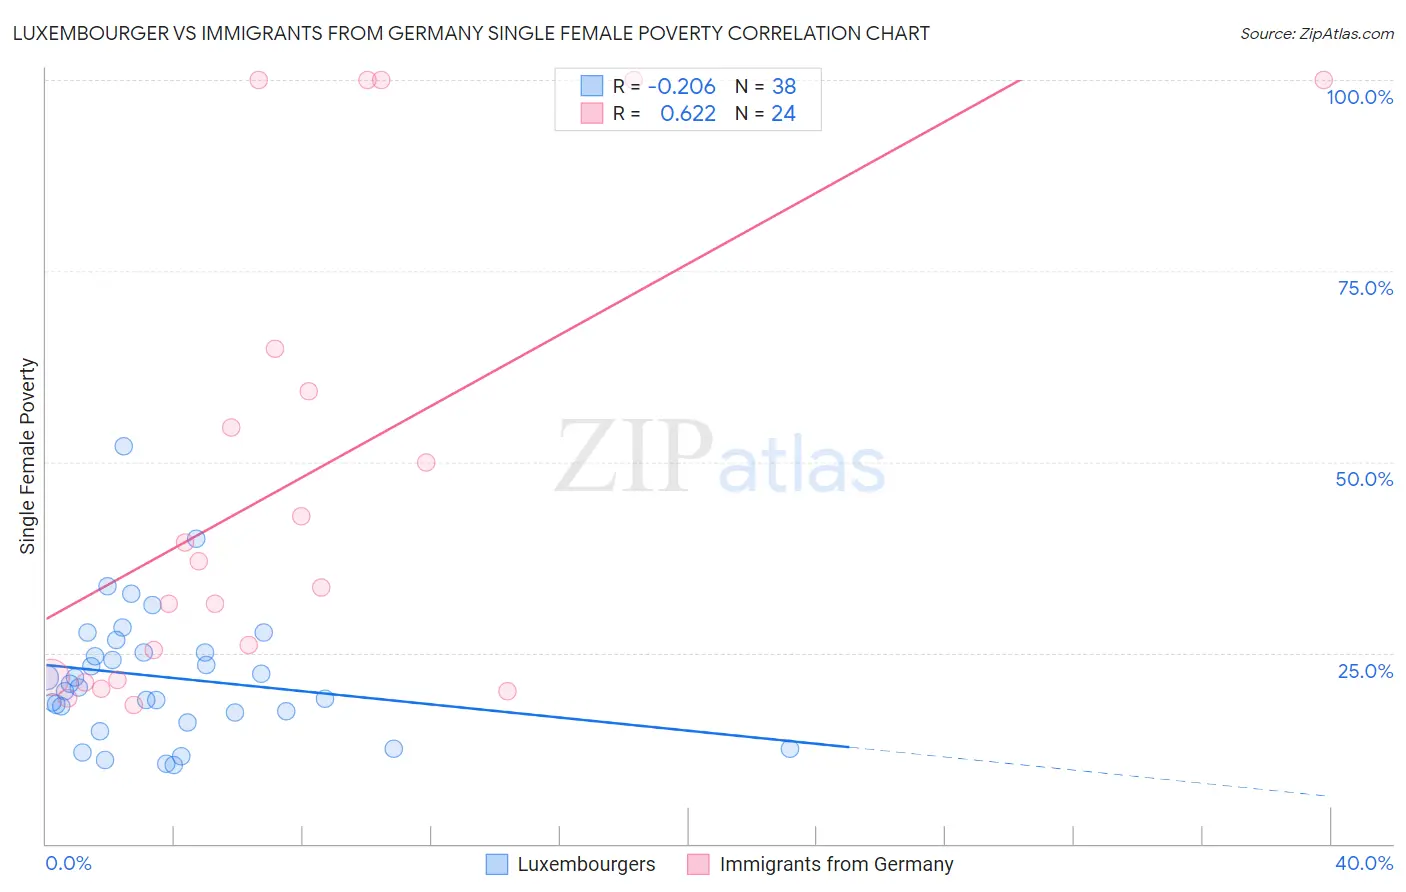 Luxembourger vs Immigrants from Germany Single Female Poverty